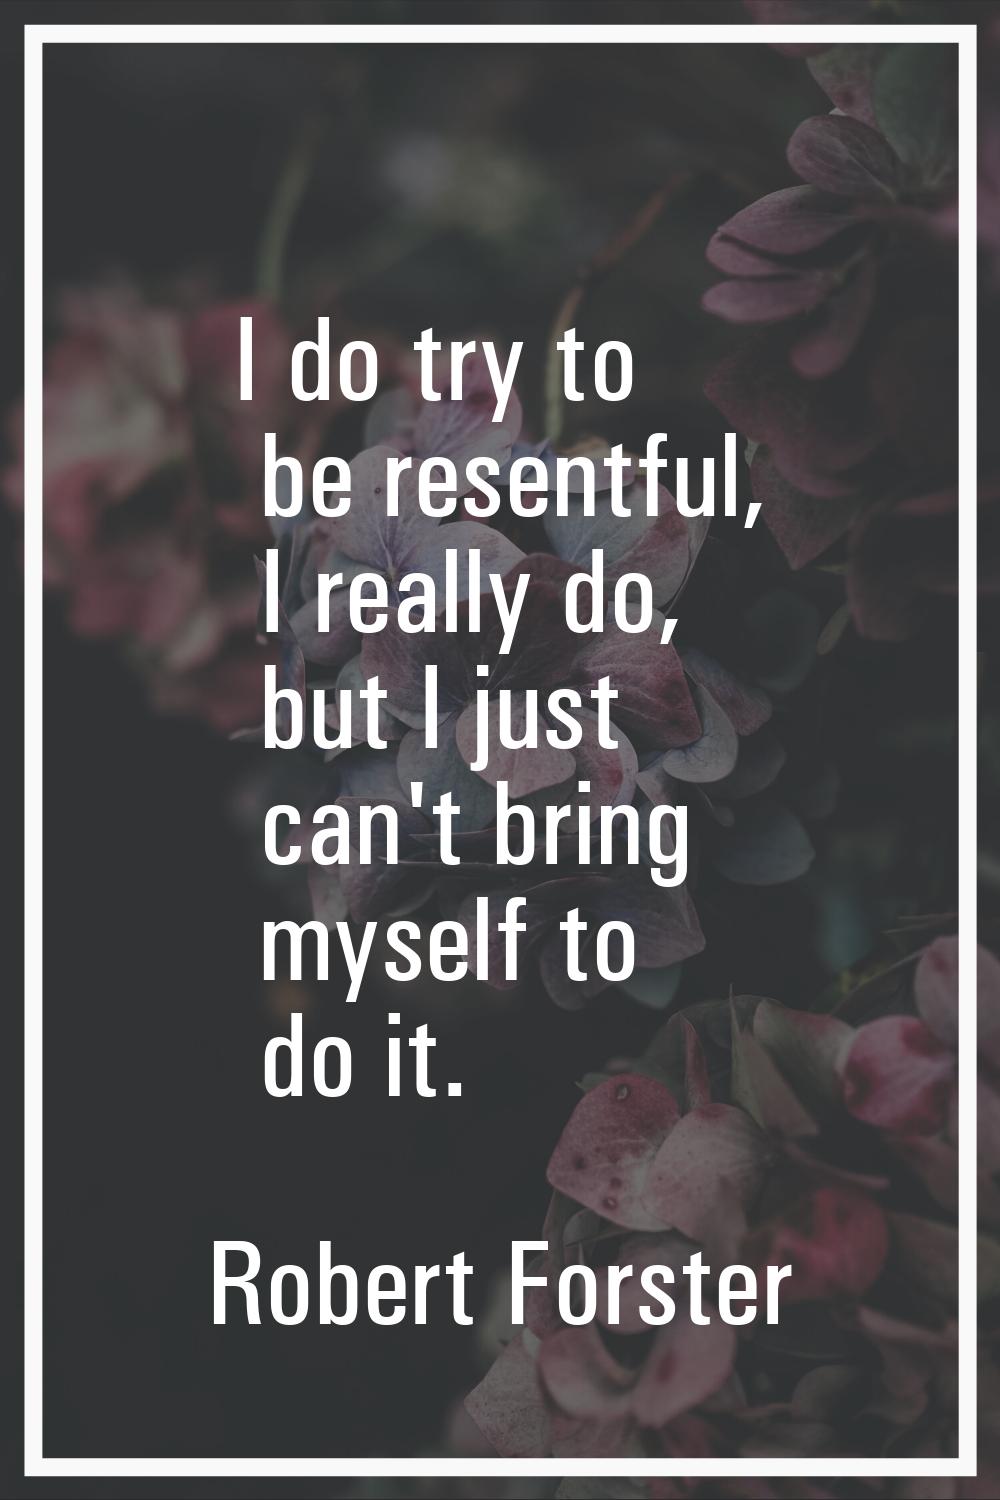 I do try to be resentful, I really do, but I just can't bring myself to do it.